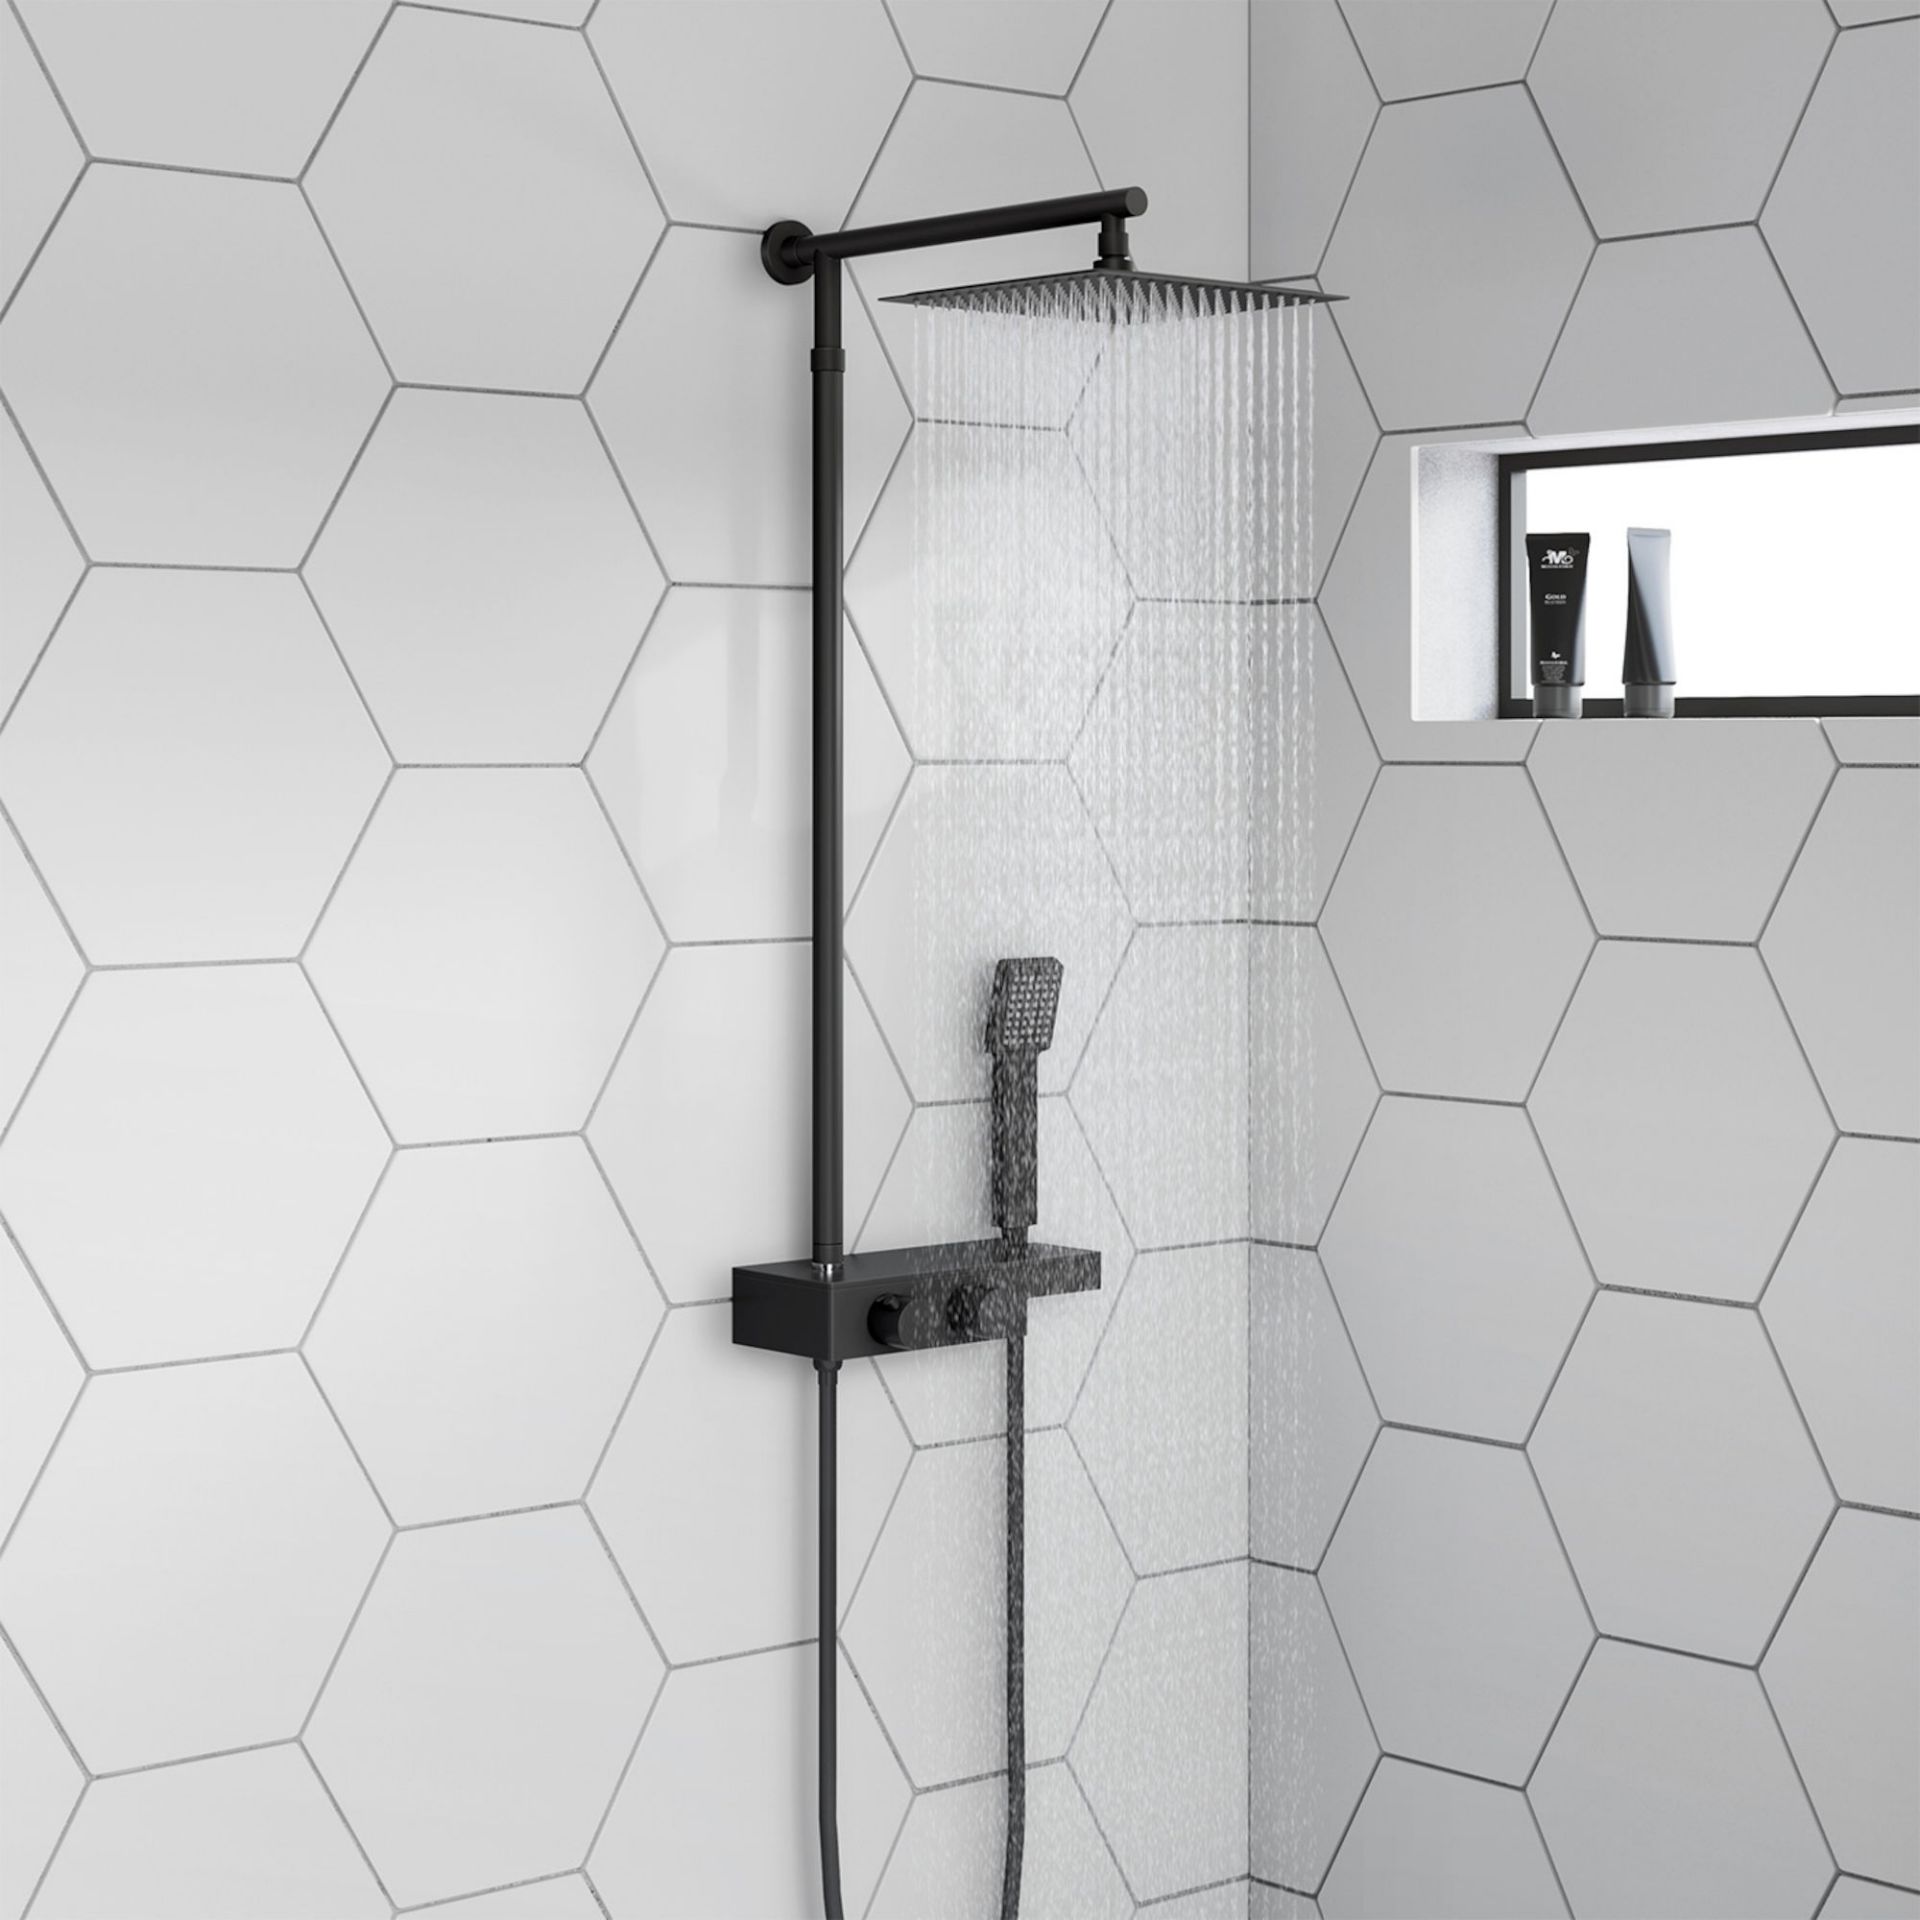 (SA178) Matte Black Square Thermostatic Mixer Shower Kit & Shelf. RRP £474.99. Manufactured from